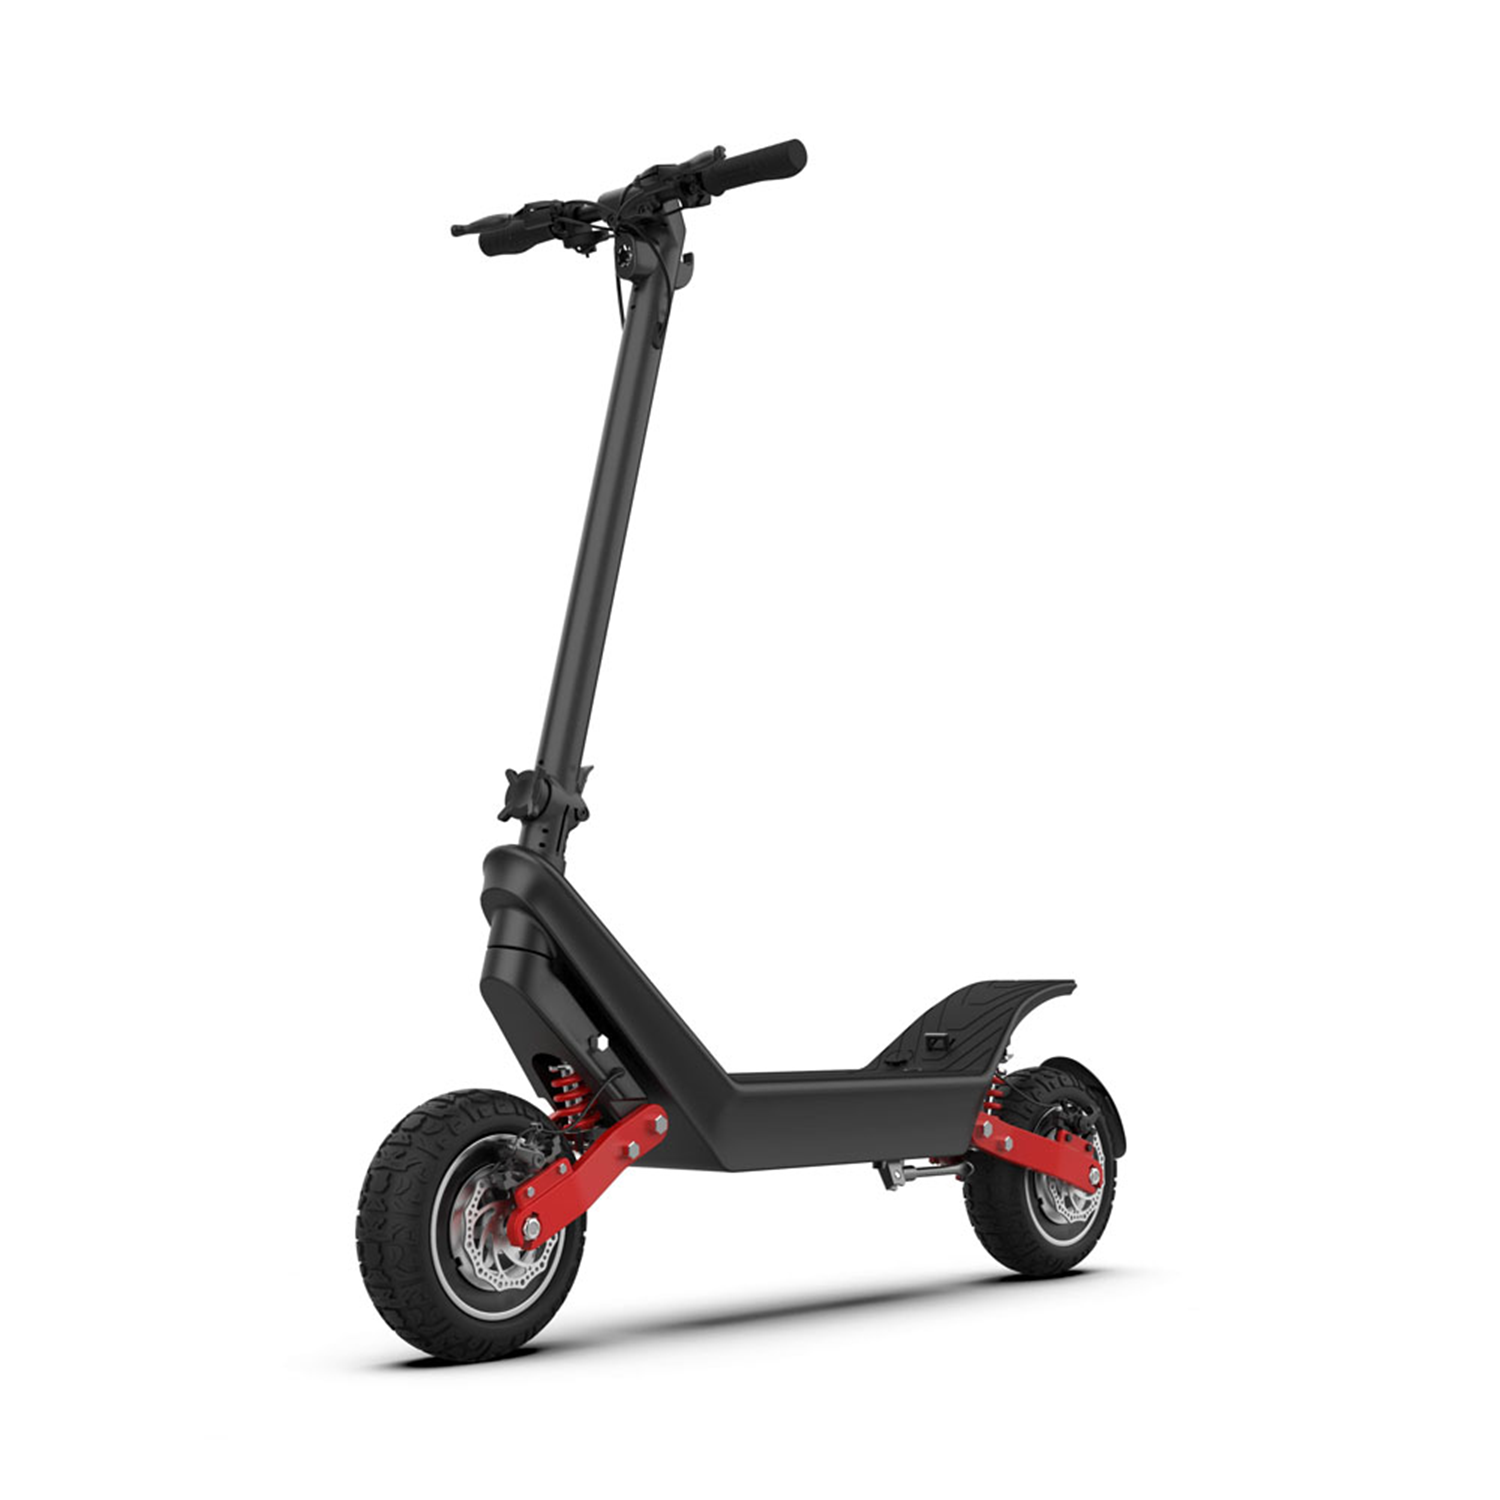 UX10 Off Road Electric Scooter Foldable | Dual-drive Motors